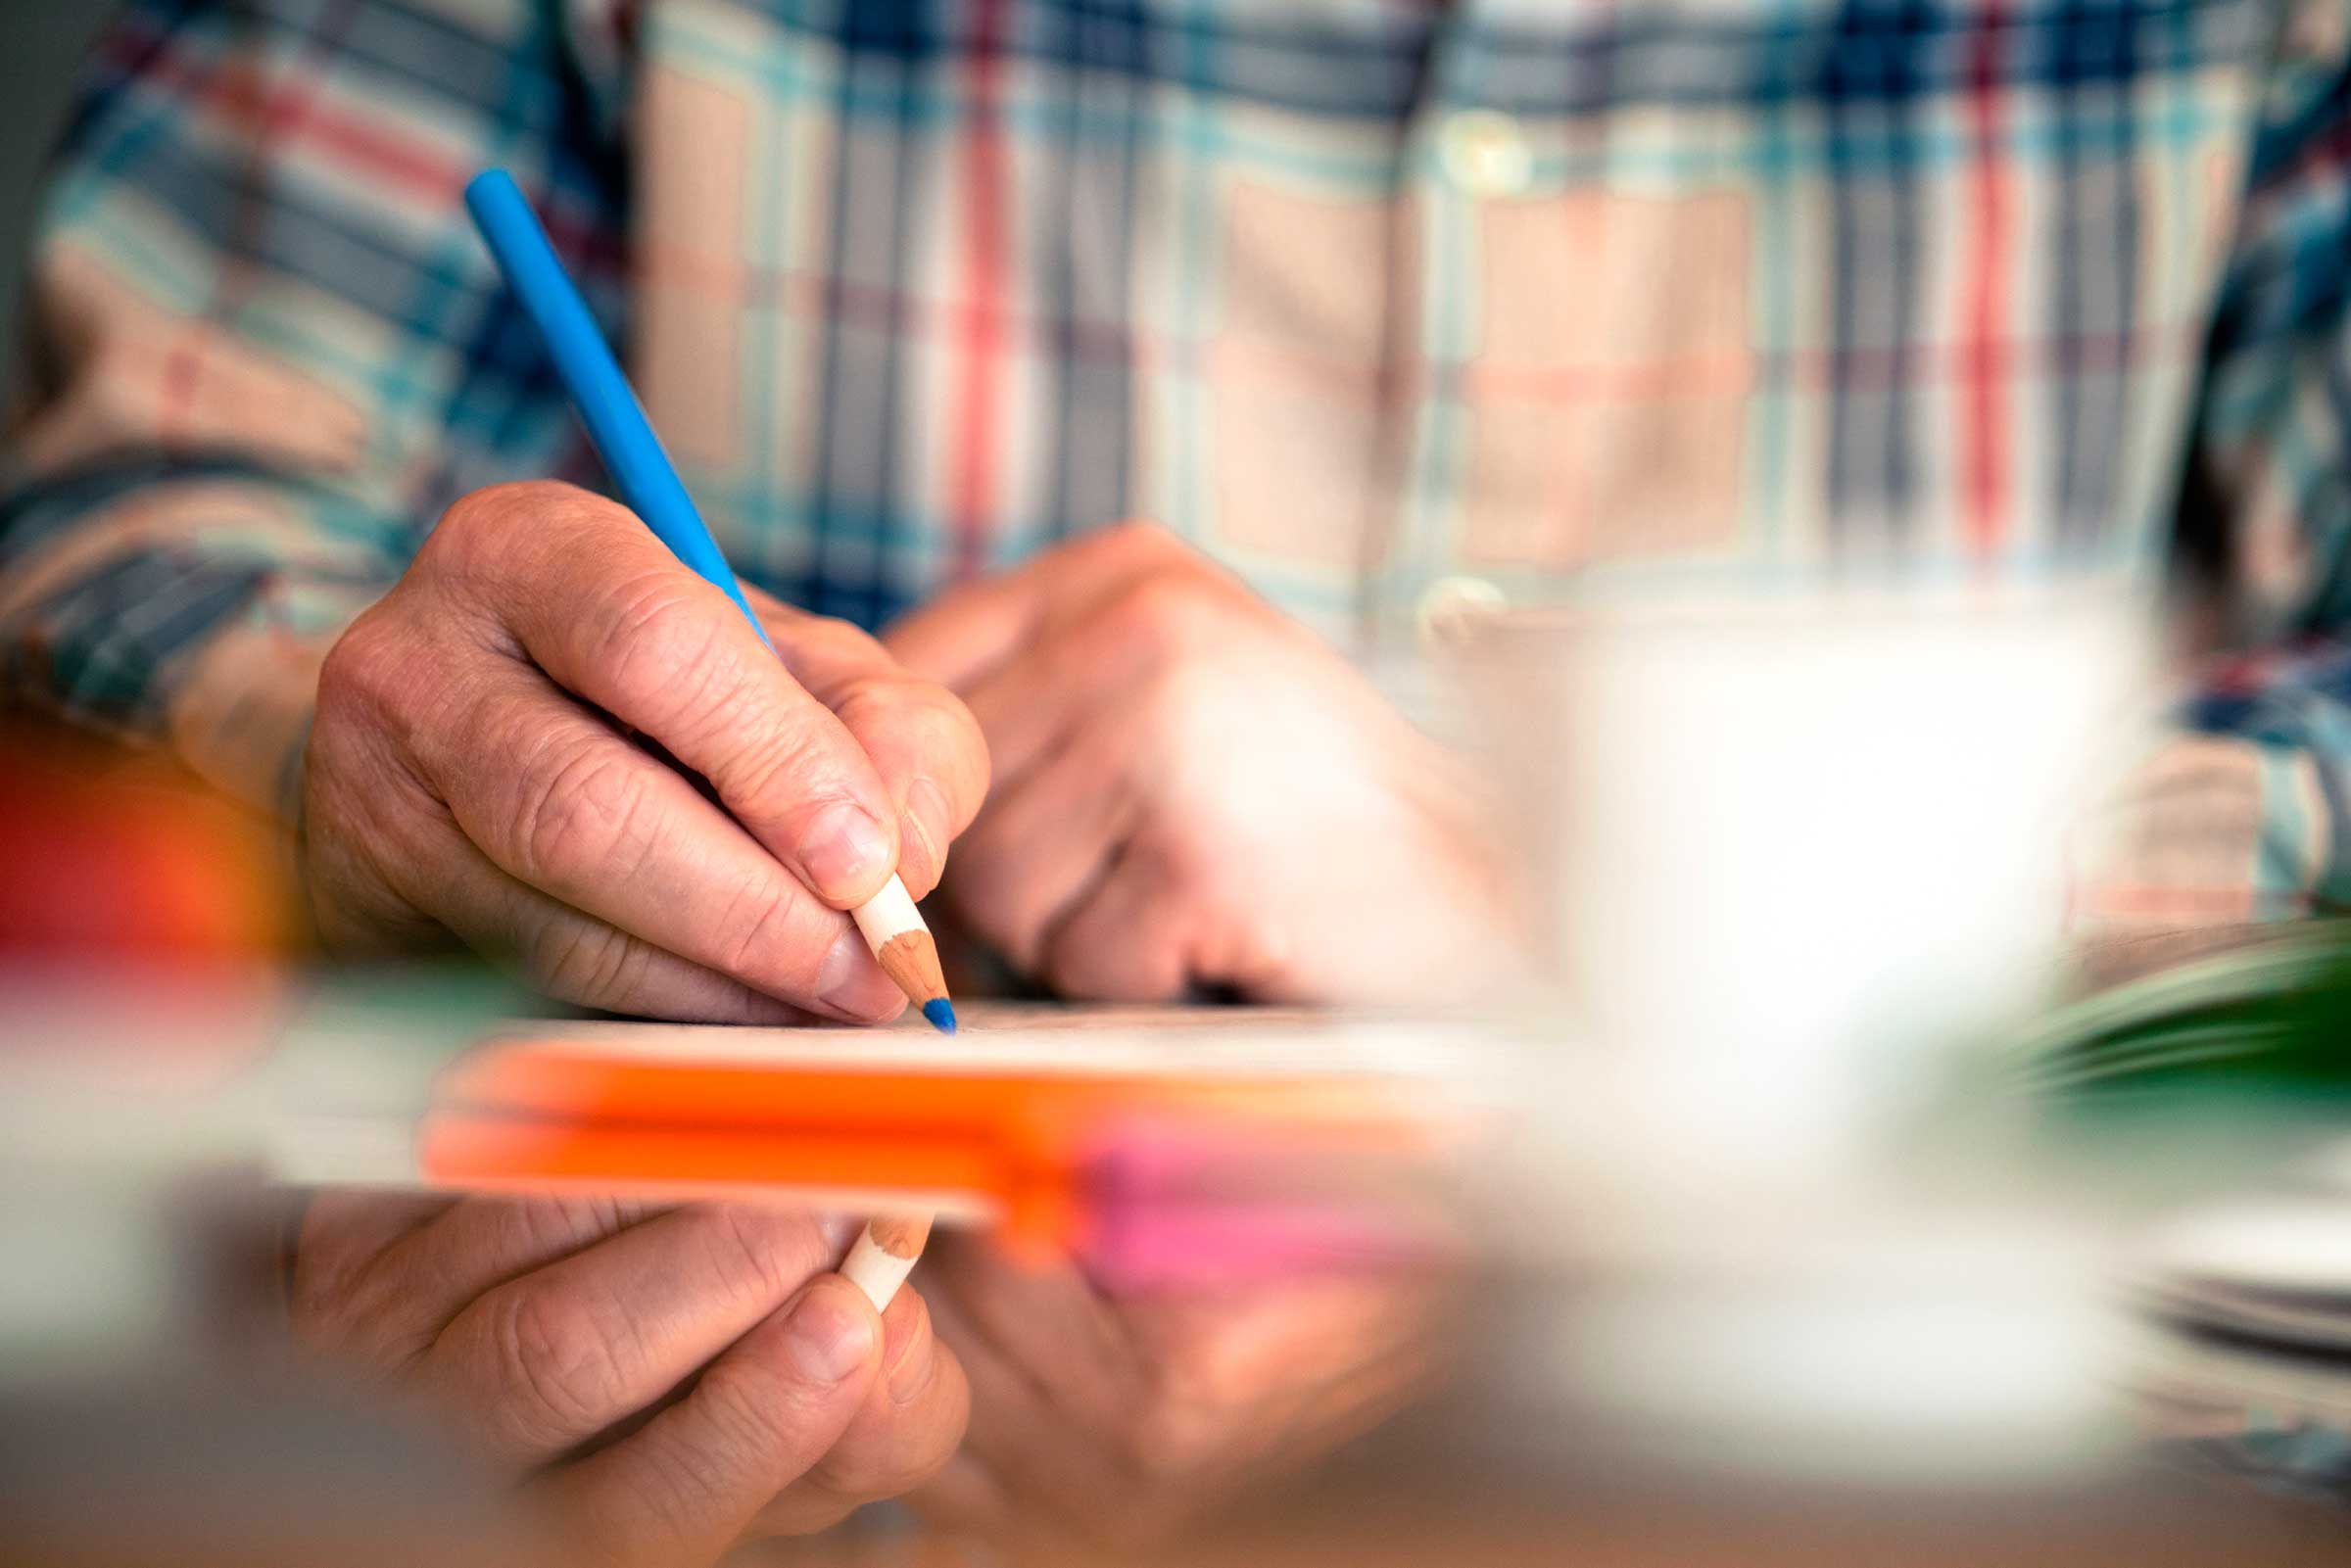 Download Coloring Books for Adults: 8 Benefits of Coloring | Reader's Digest